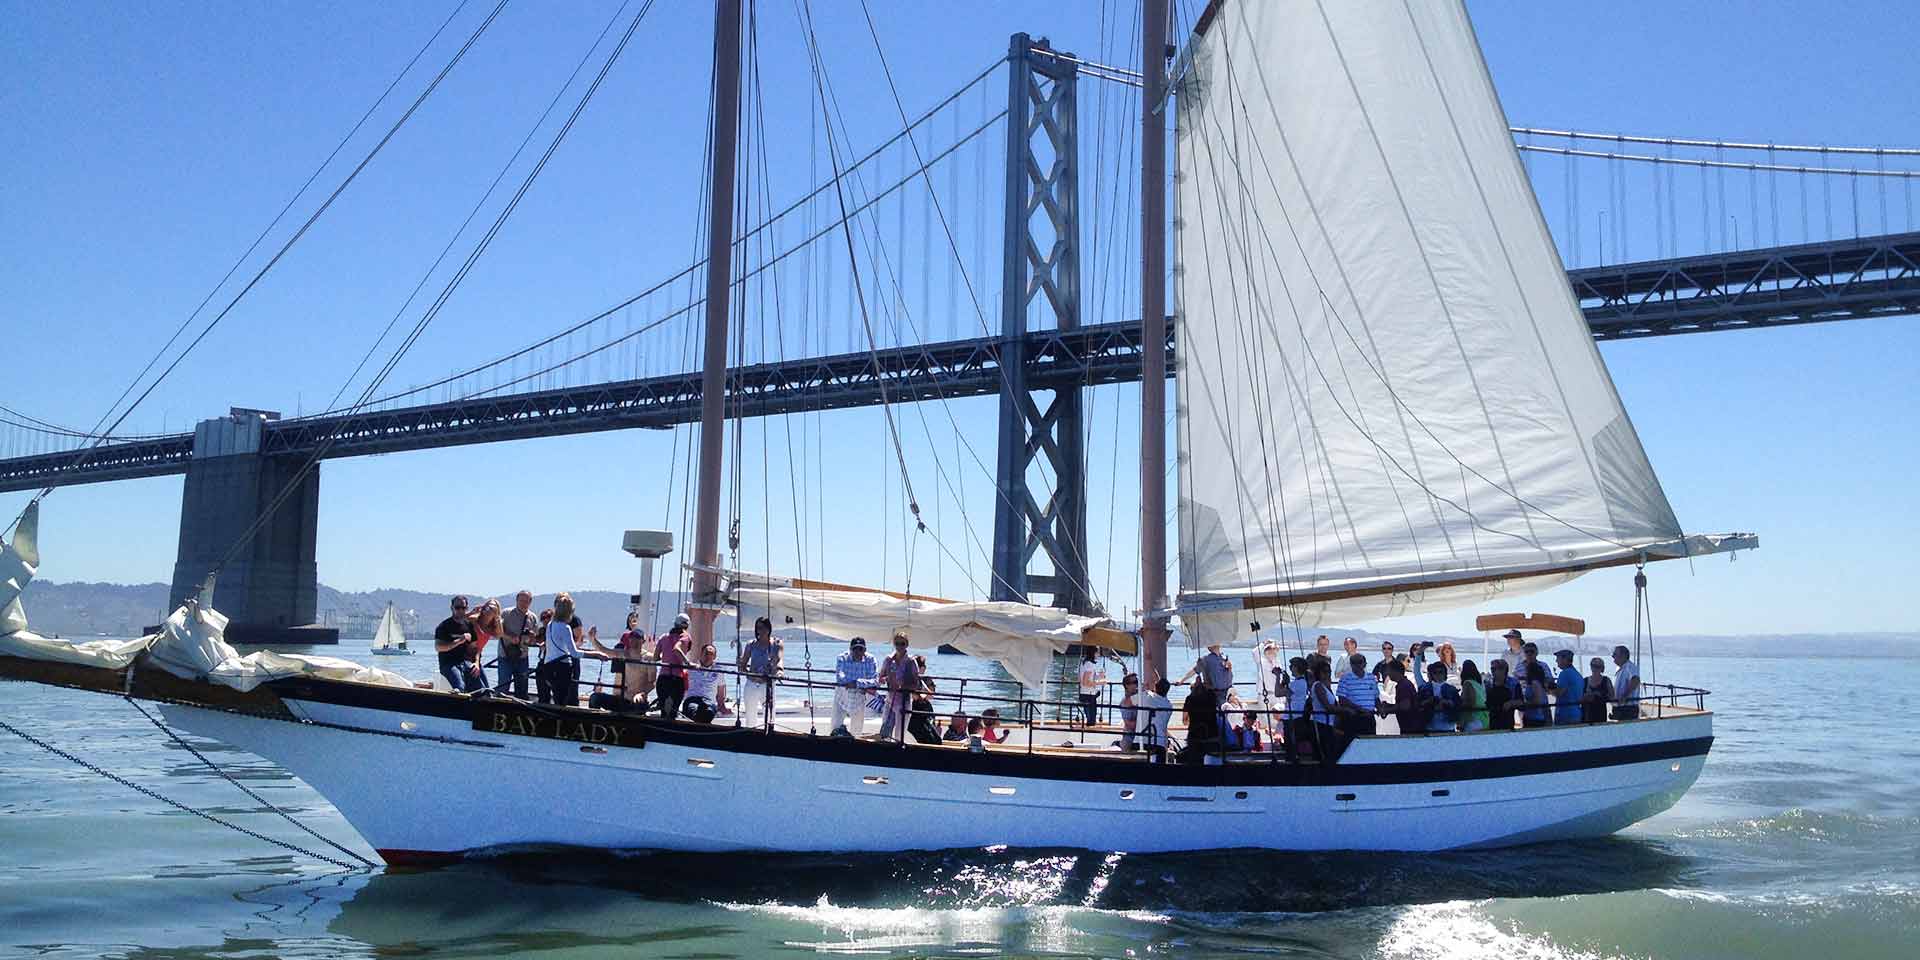 The Best Way to Experience San Francisco Is by Sailboat